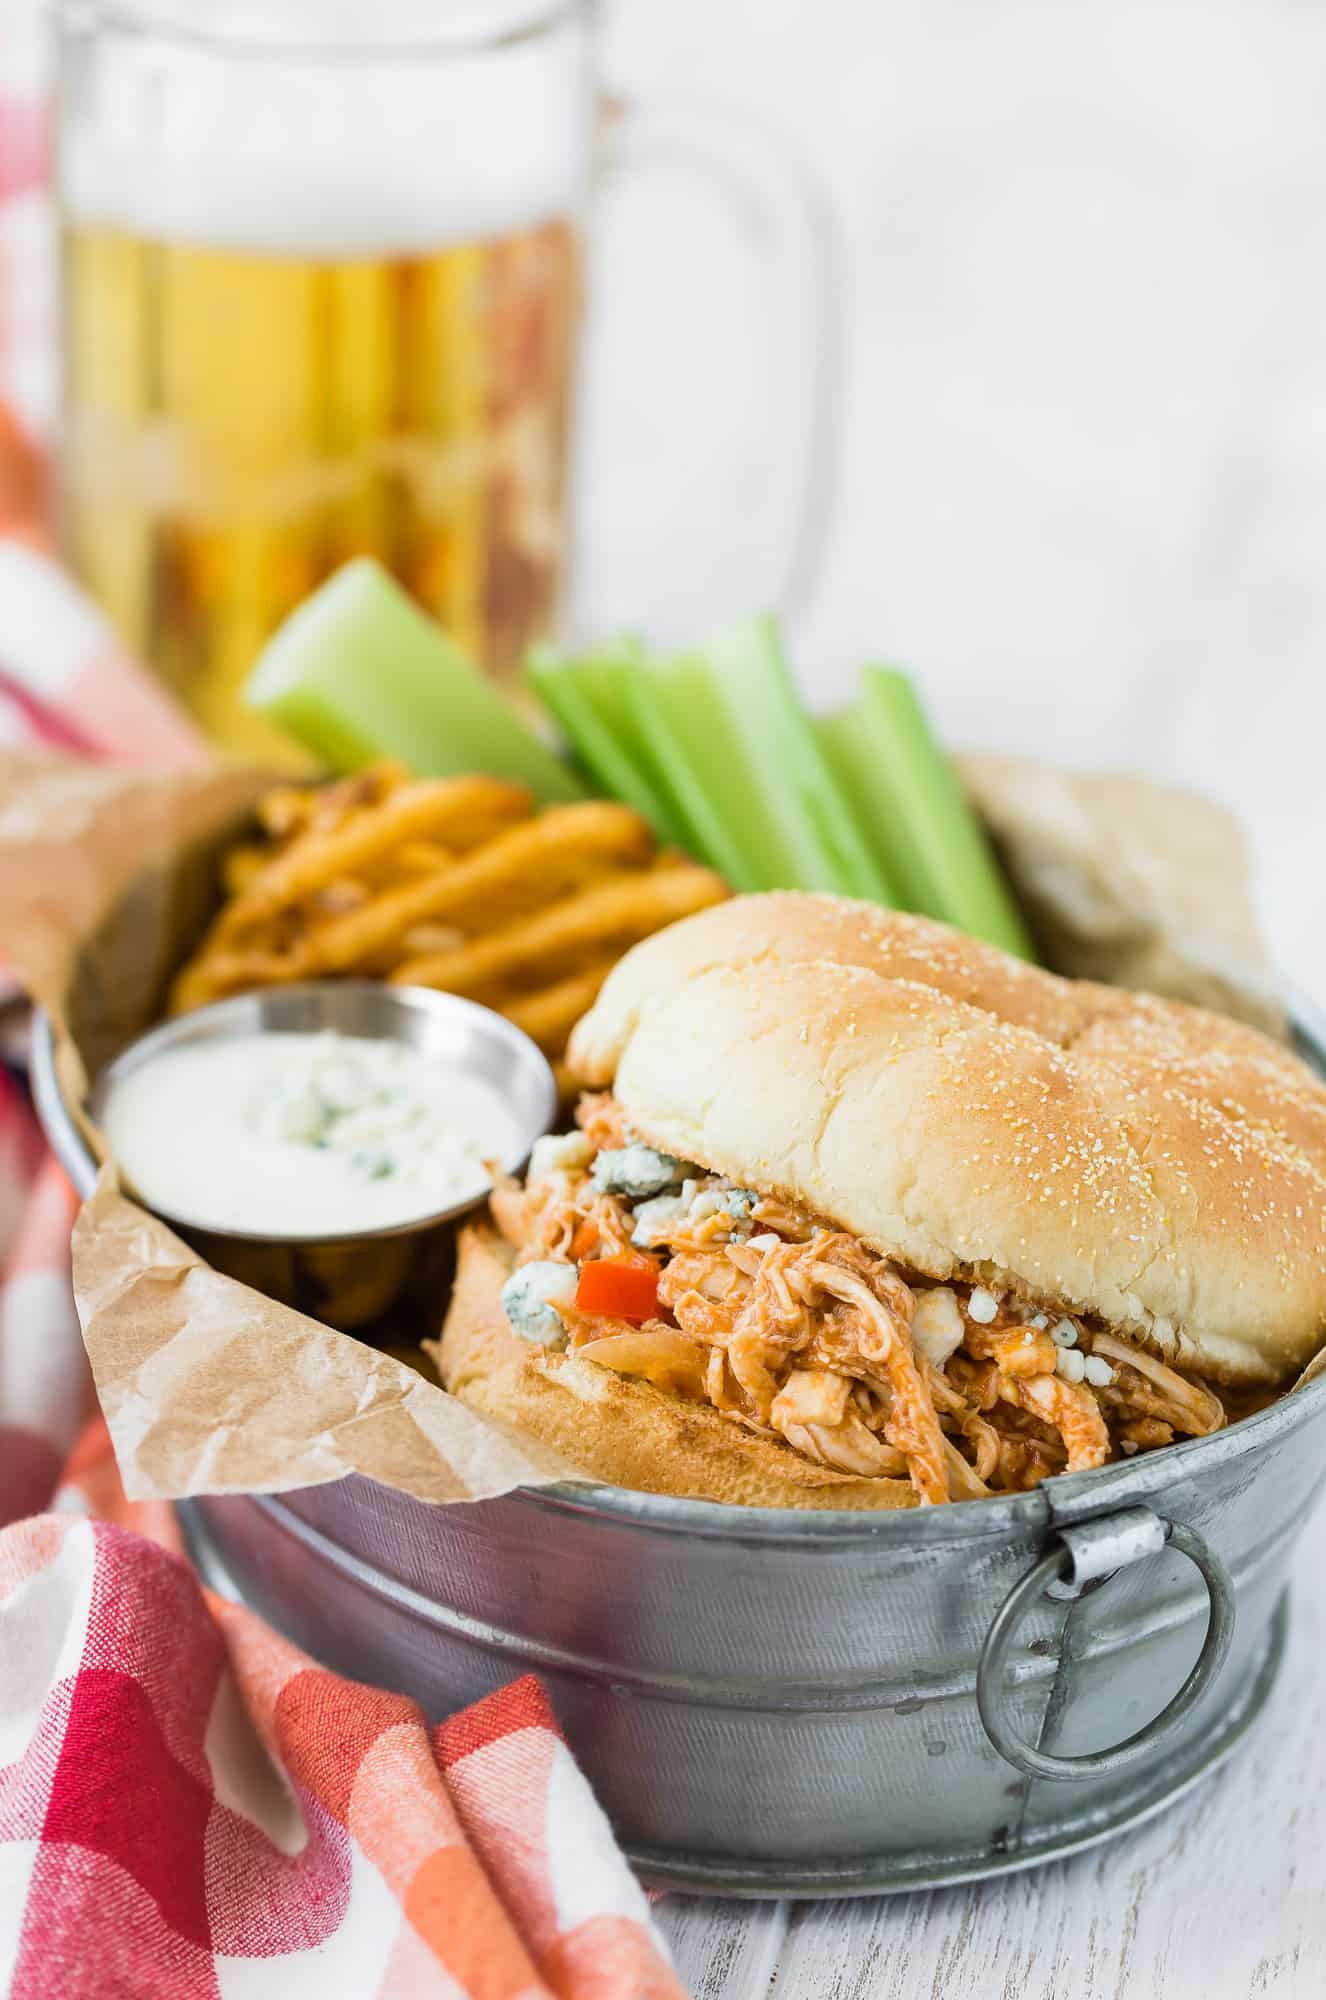 Buffalo chicken sandwich with beer in background.